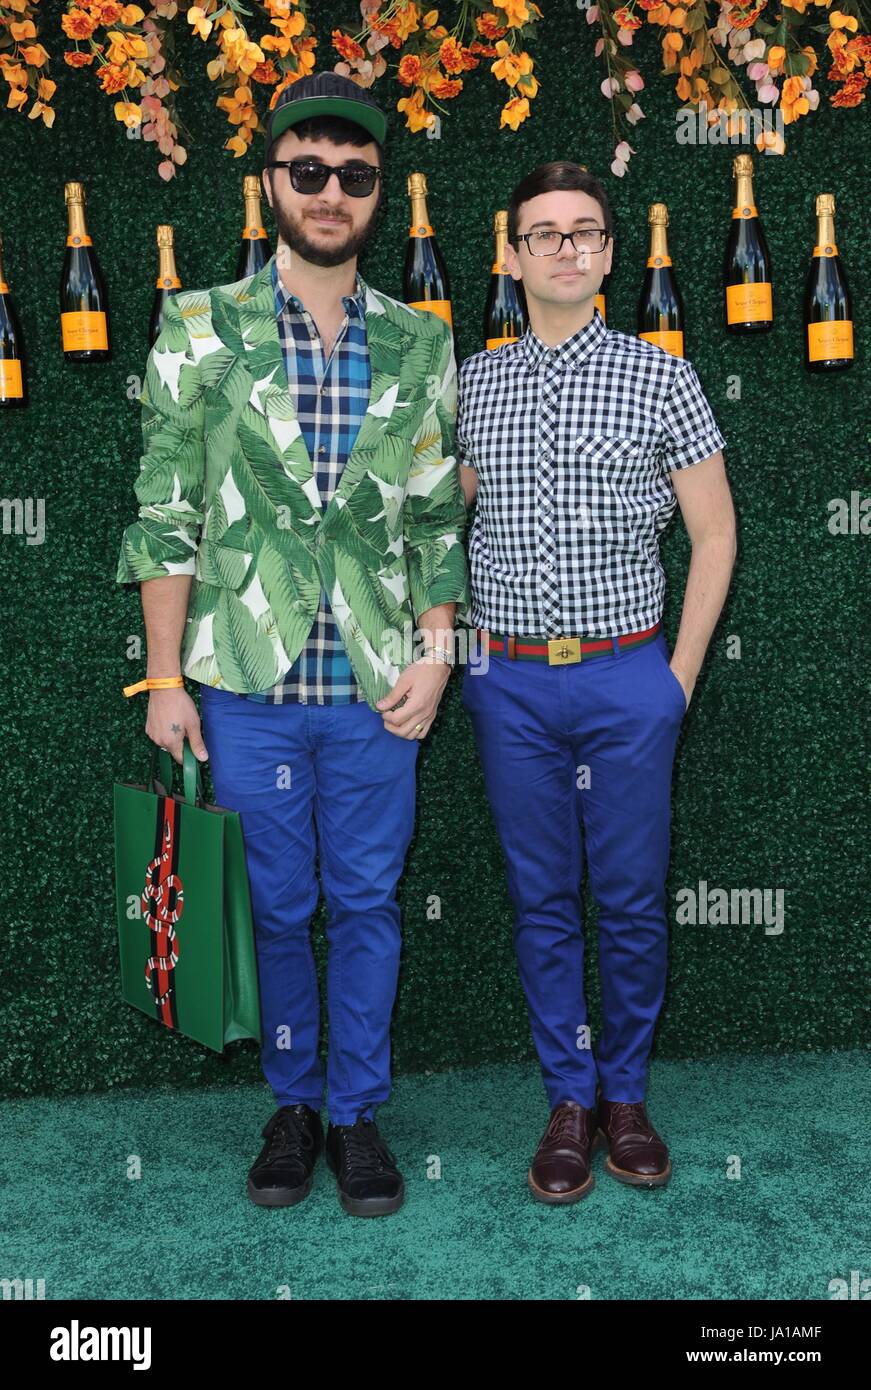 Brad Walsh, Christian Sirano in attendance for 10th Annual Veuve Clicquot Polo Classic, Liberty State Park, Jersey City, NJ June 3, 2017. Photo By: Kristin Callahan/Everett Collection Stock Photo